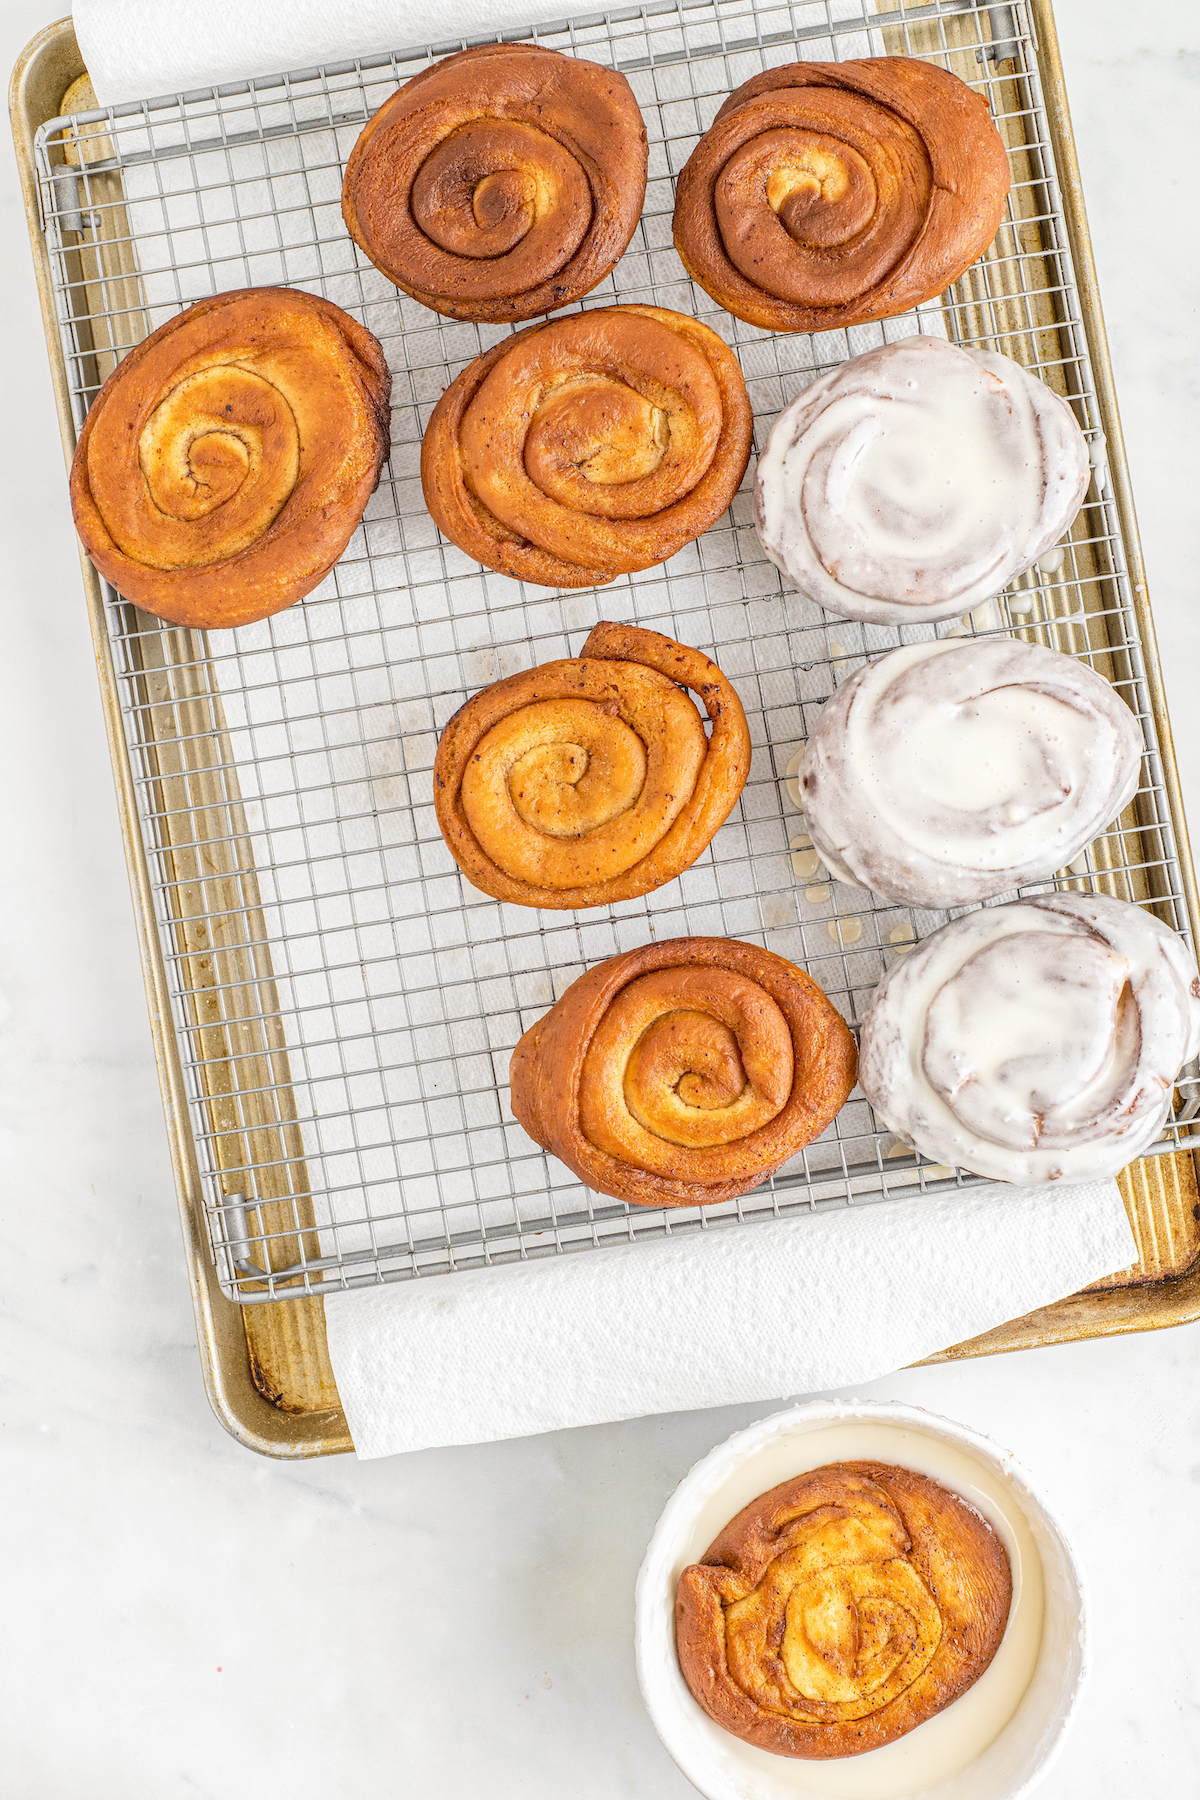 A wire rack over a parchment-lined baking sheet. Honey buns are on the rack, half of them glazed and half of them plain.